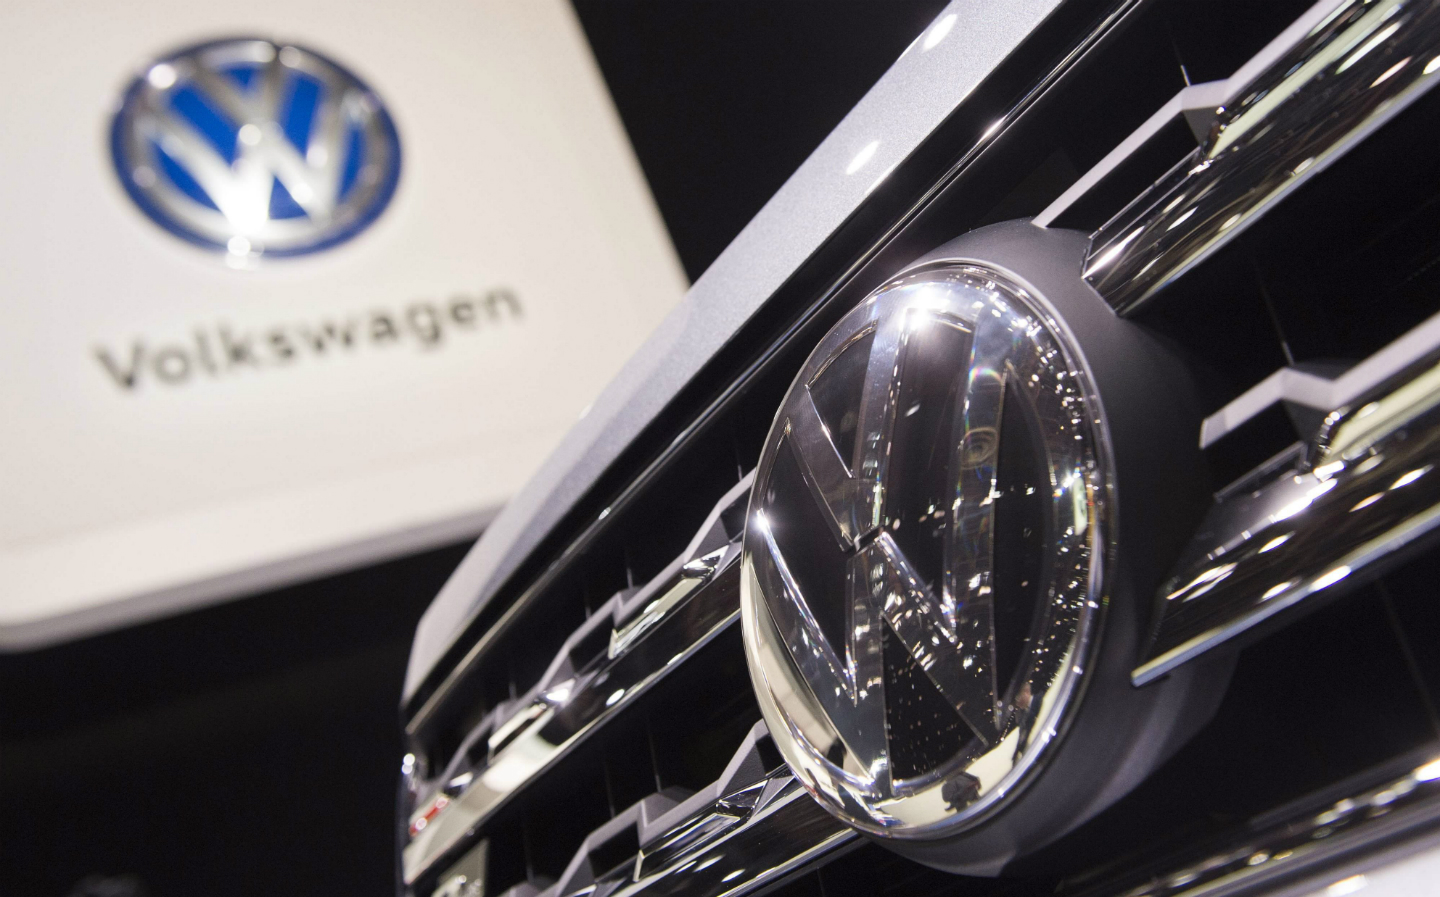 Volkswagen bosses ordered staff to carry on cheating, FBI alleges